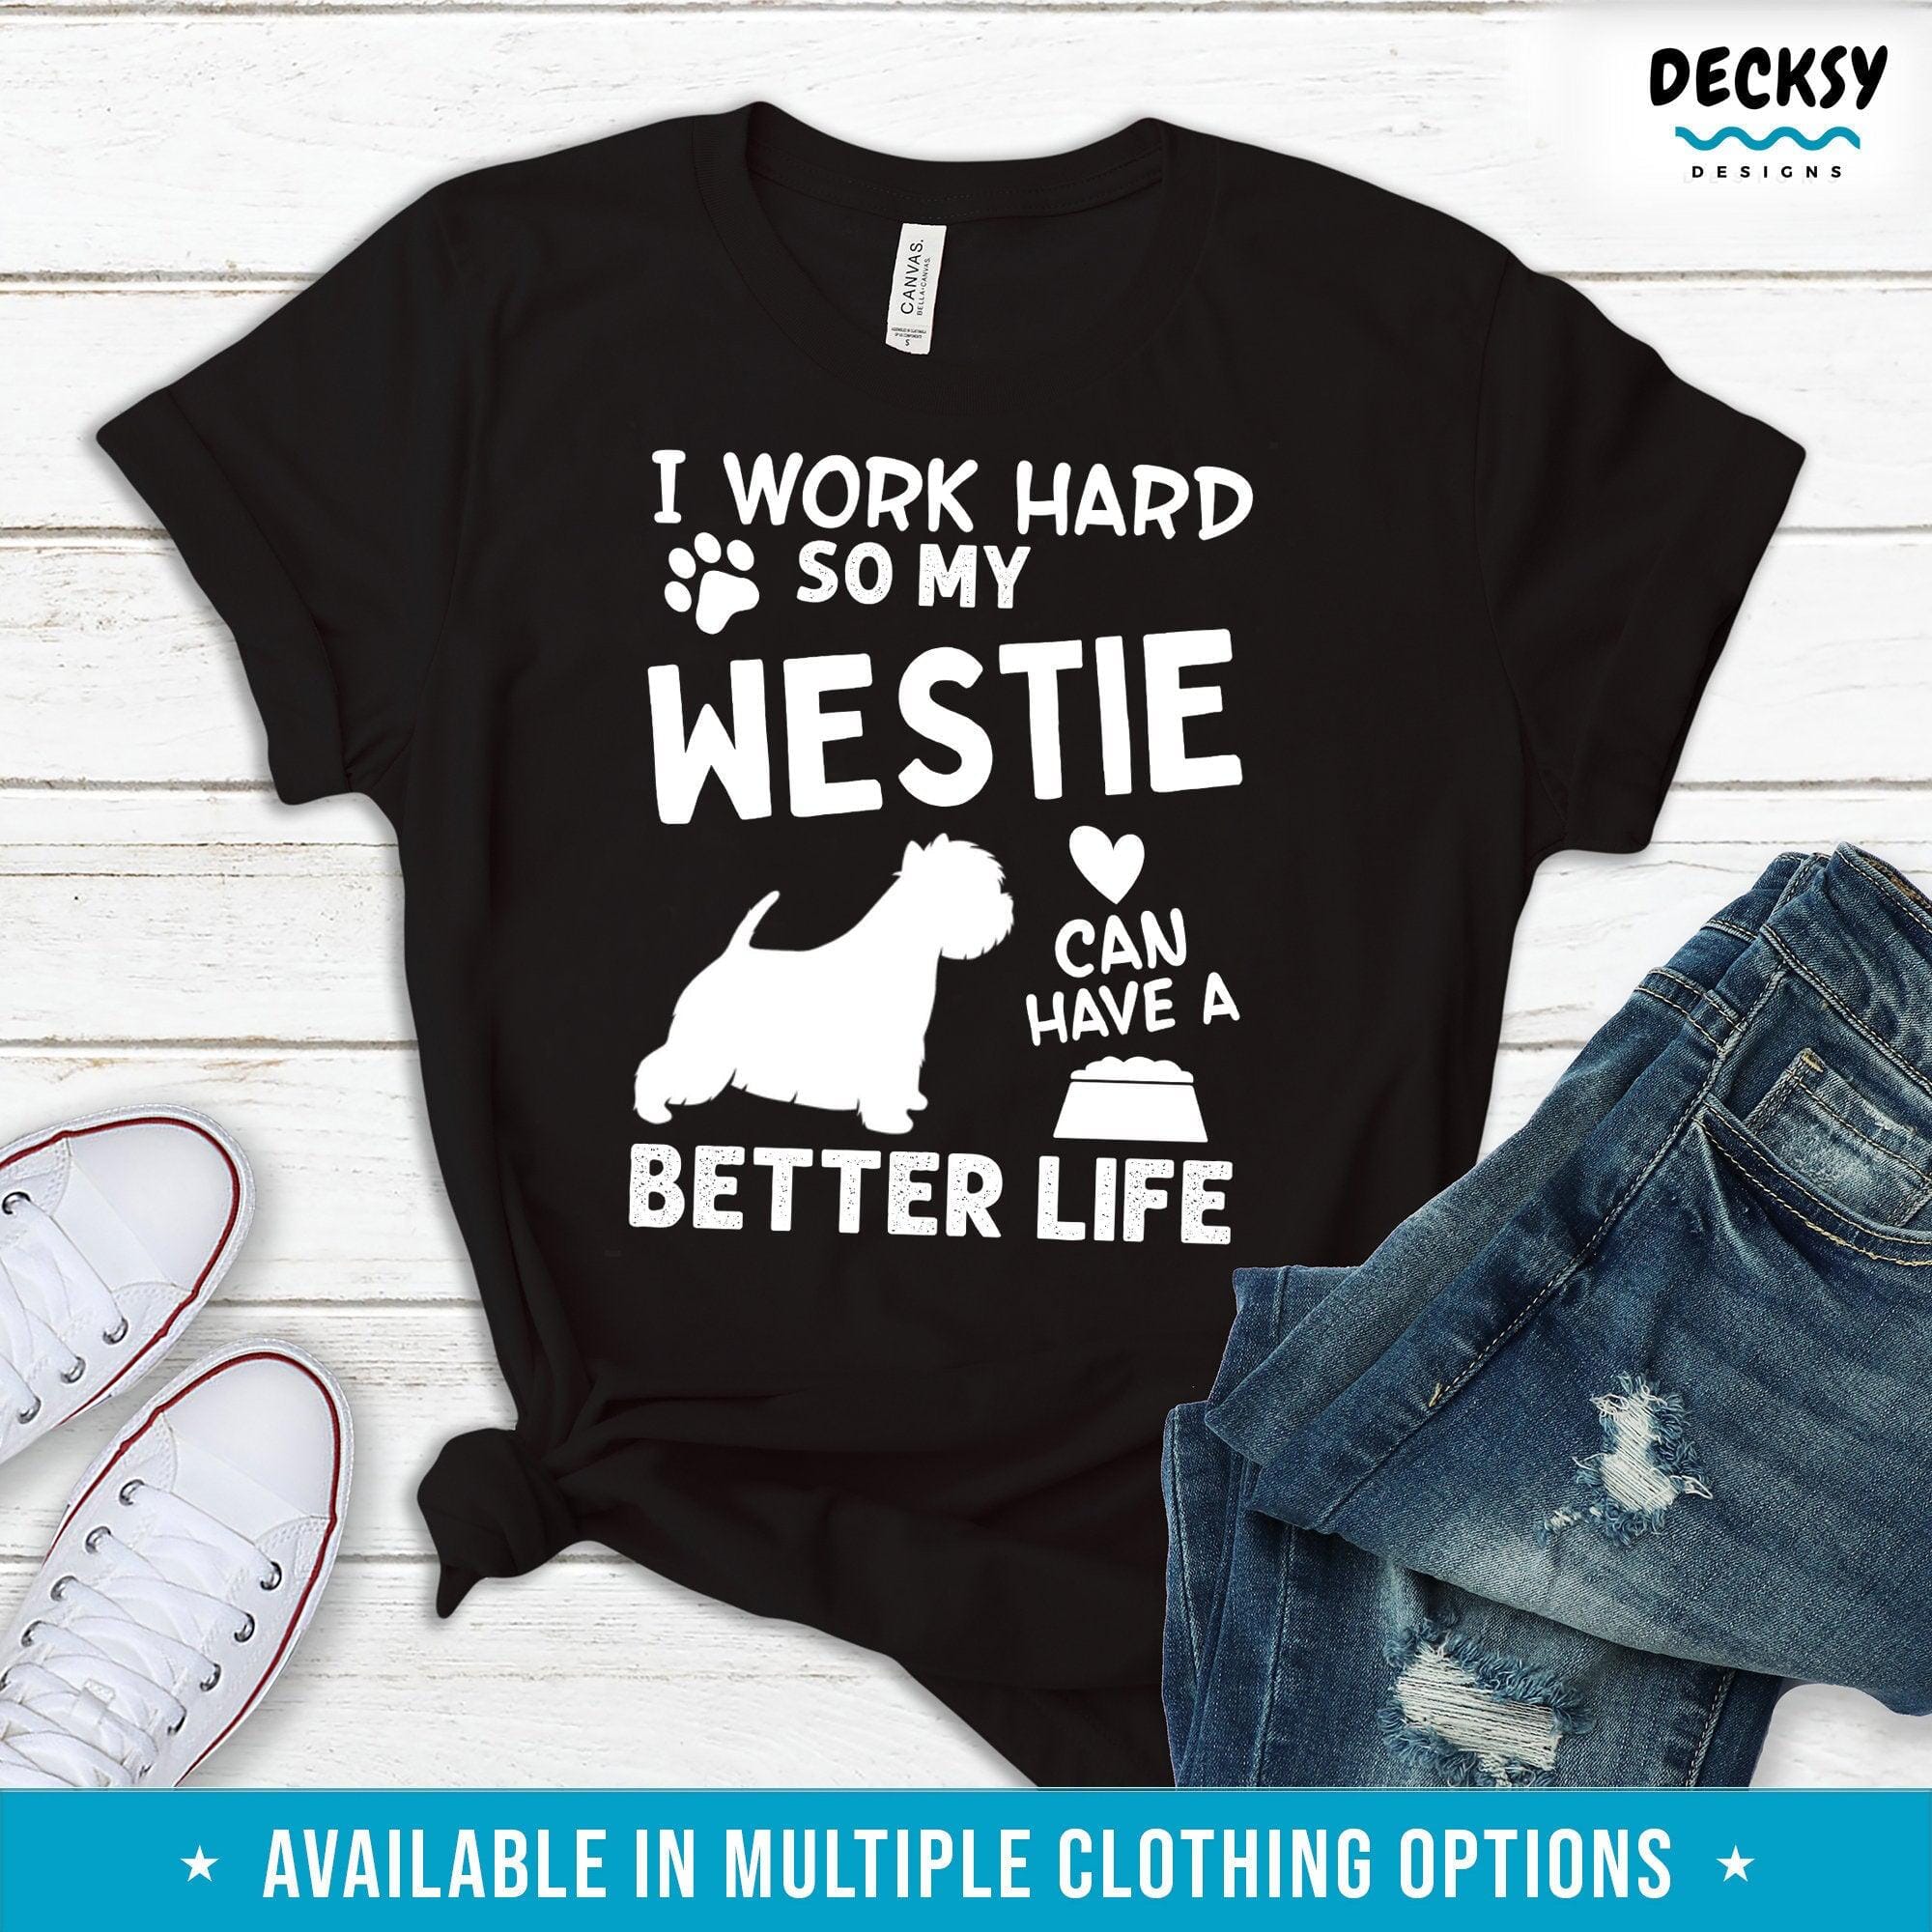 Westie Sweatshirt, West Highland White Terrier Gift-Clothing:Gender-Neutral Adult Clothing:Tops & Tees:T-shirts:Graphic Tees-DecksyDesigns